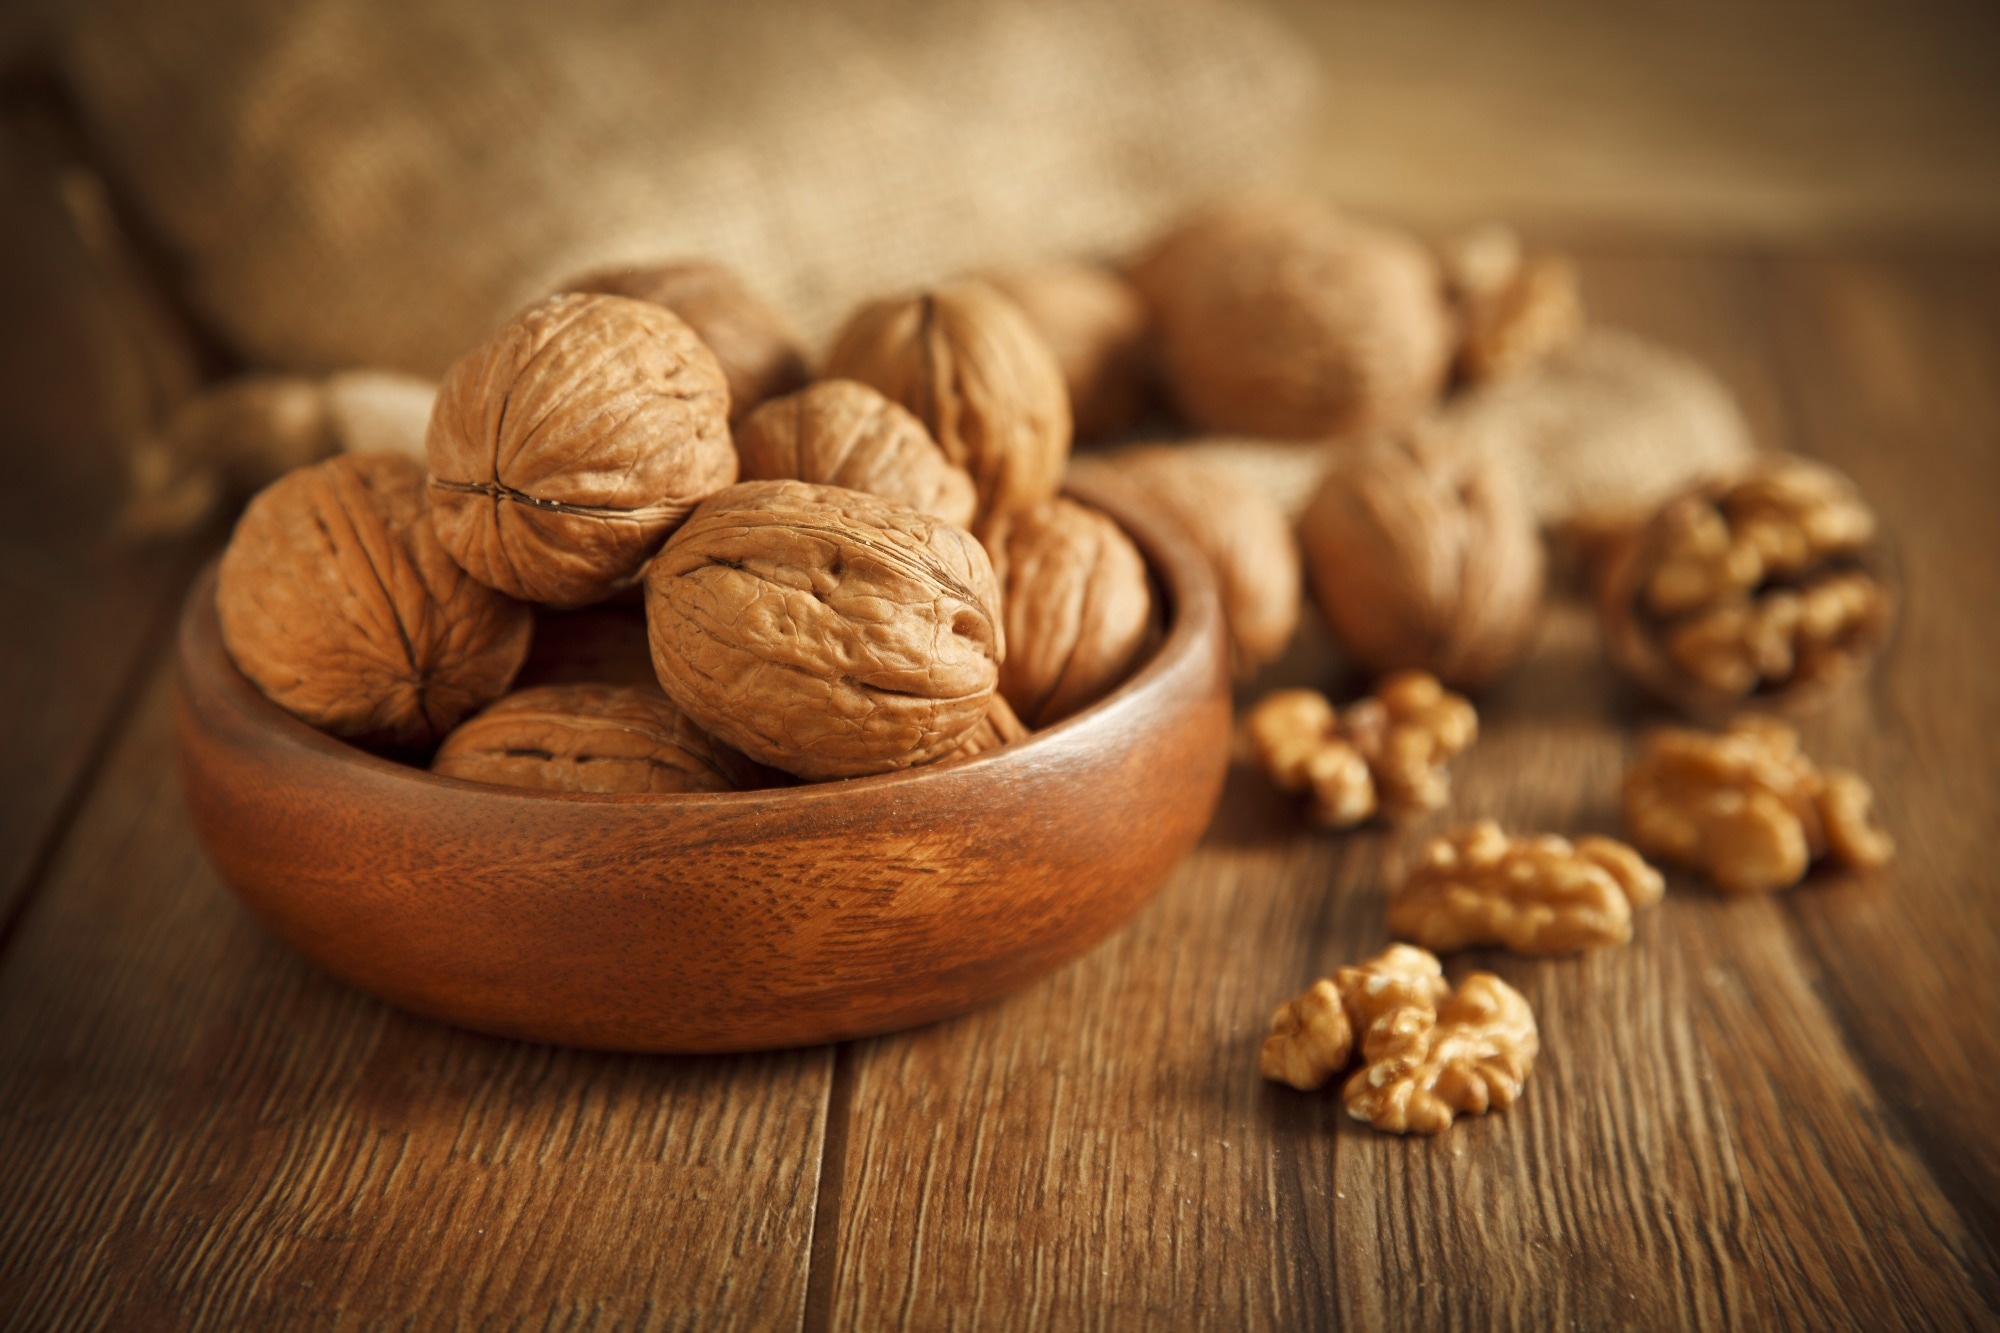 Review: Nuts in the Prevention and Management of Type 2 Diabetes. Image Credit: gorkem demir / Shutterstock